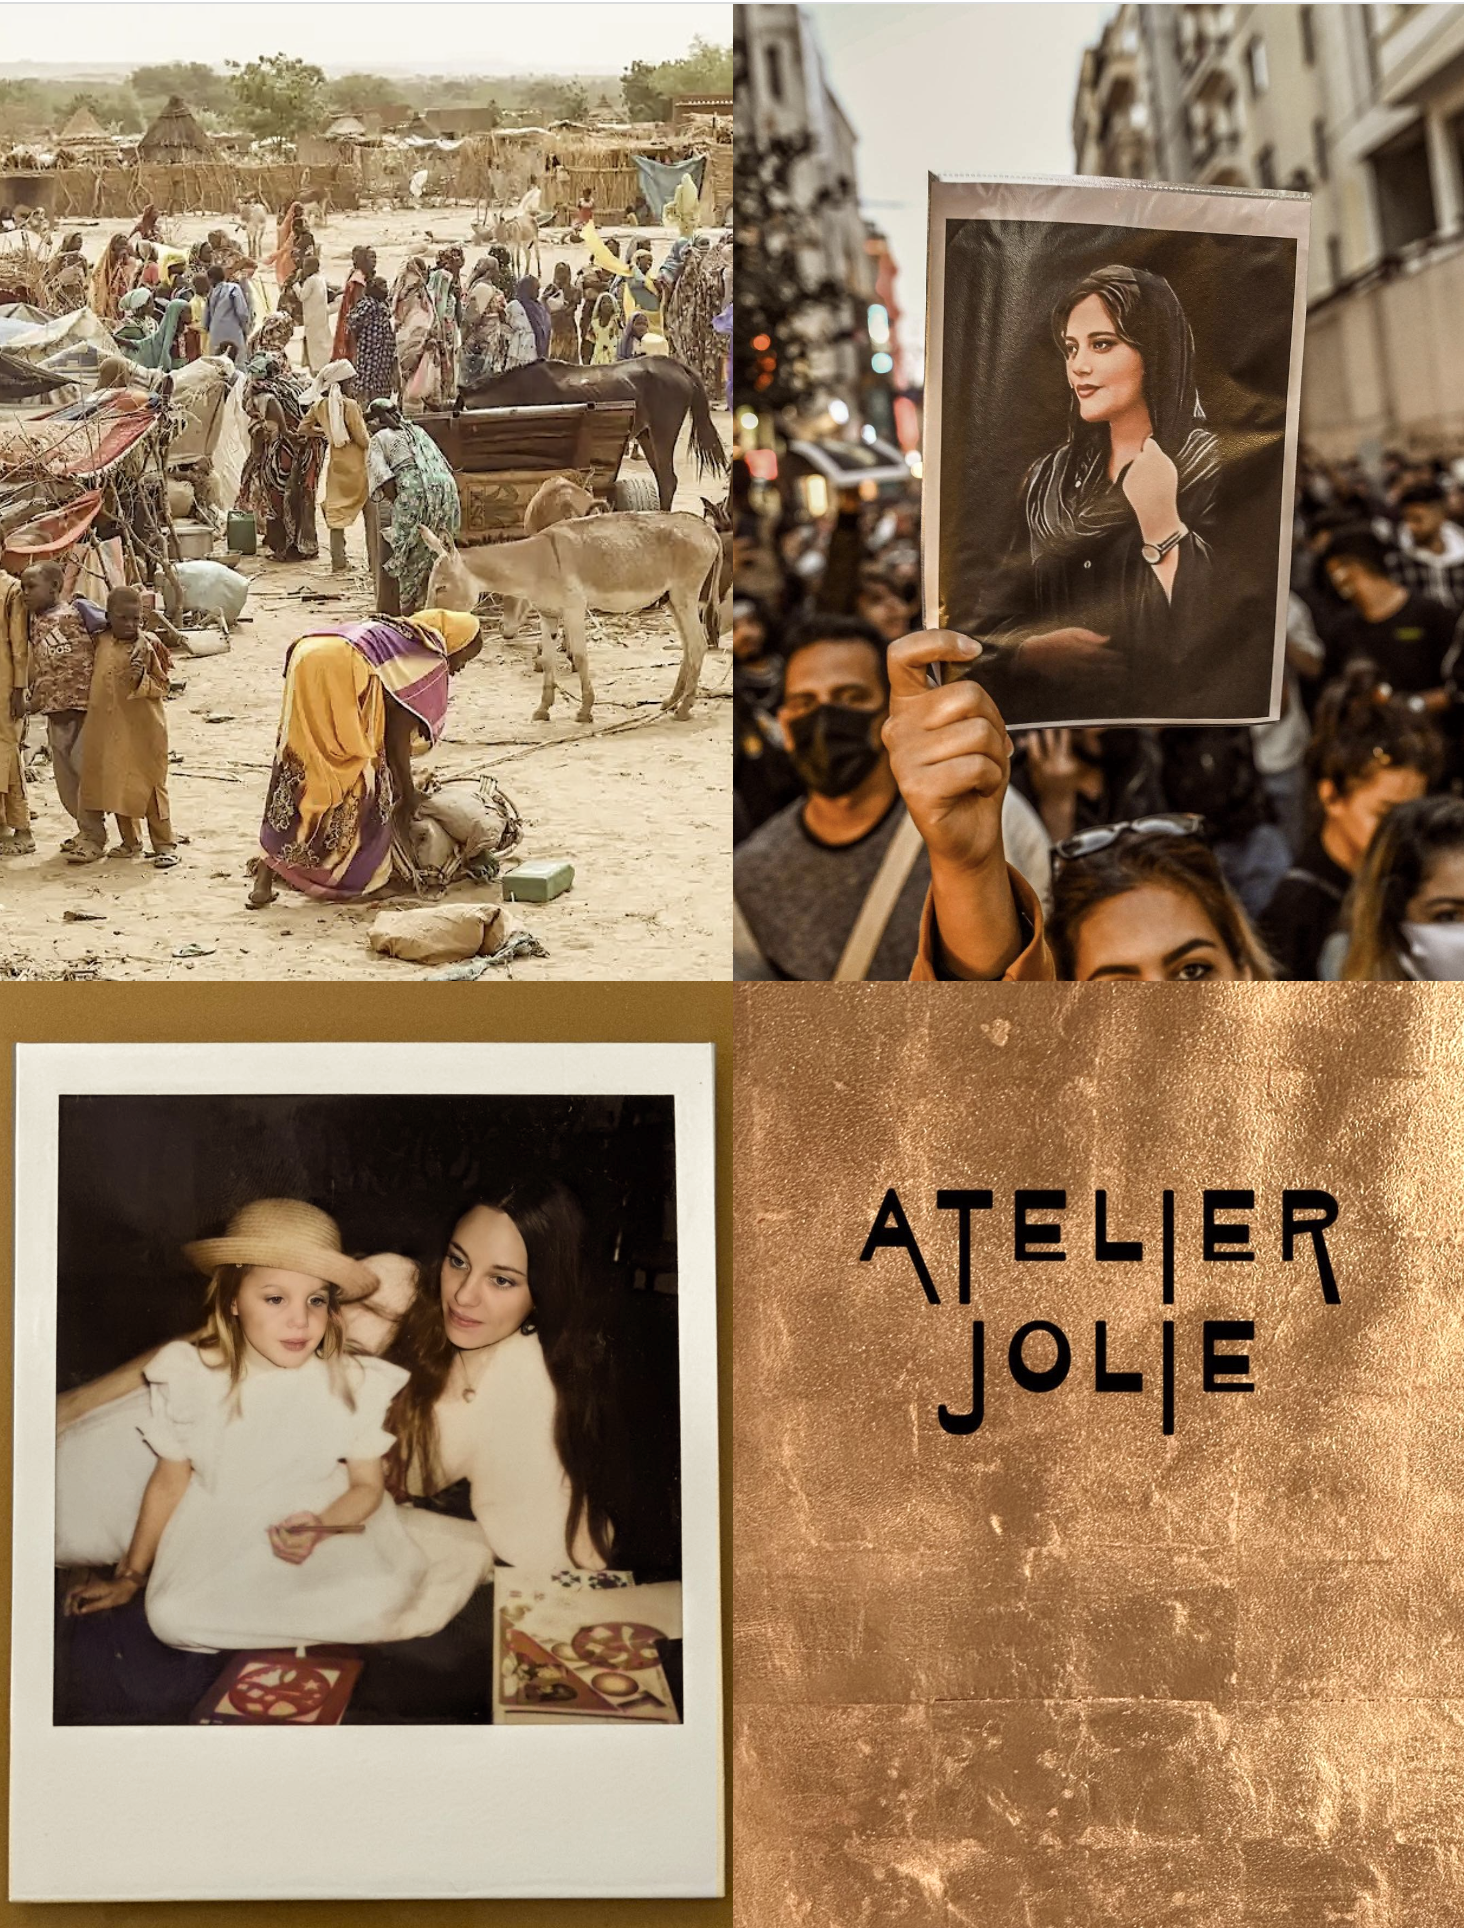 Angelina Jolie's Fashion Collective Teams Up with Chloé and